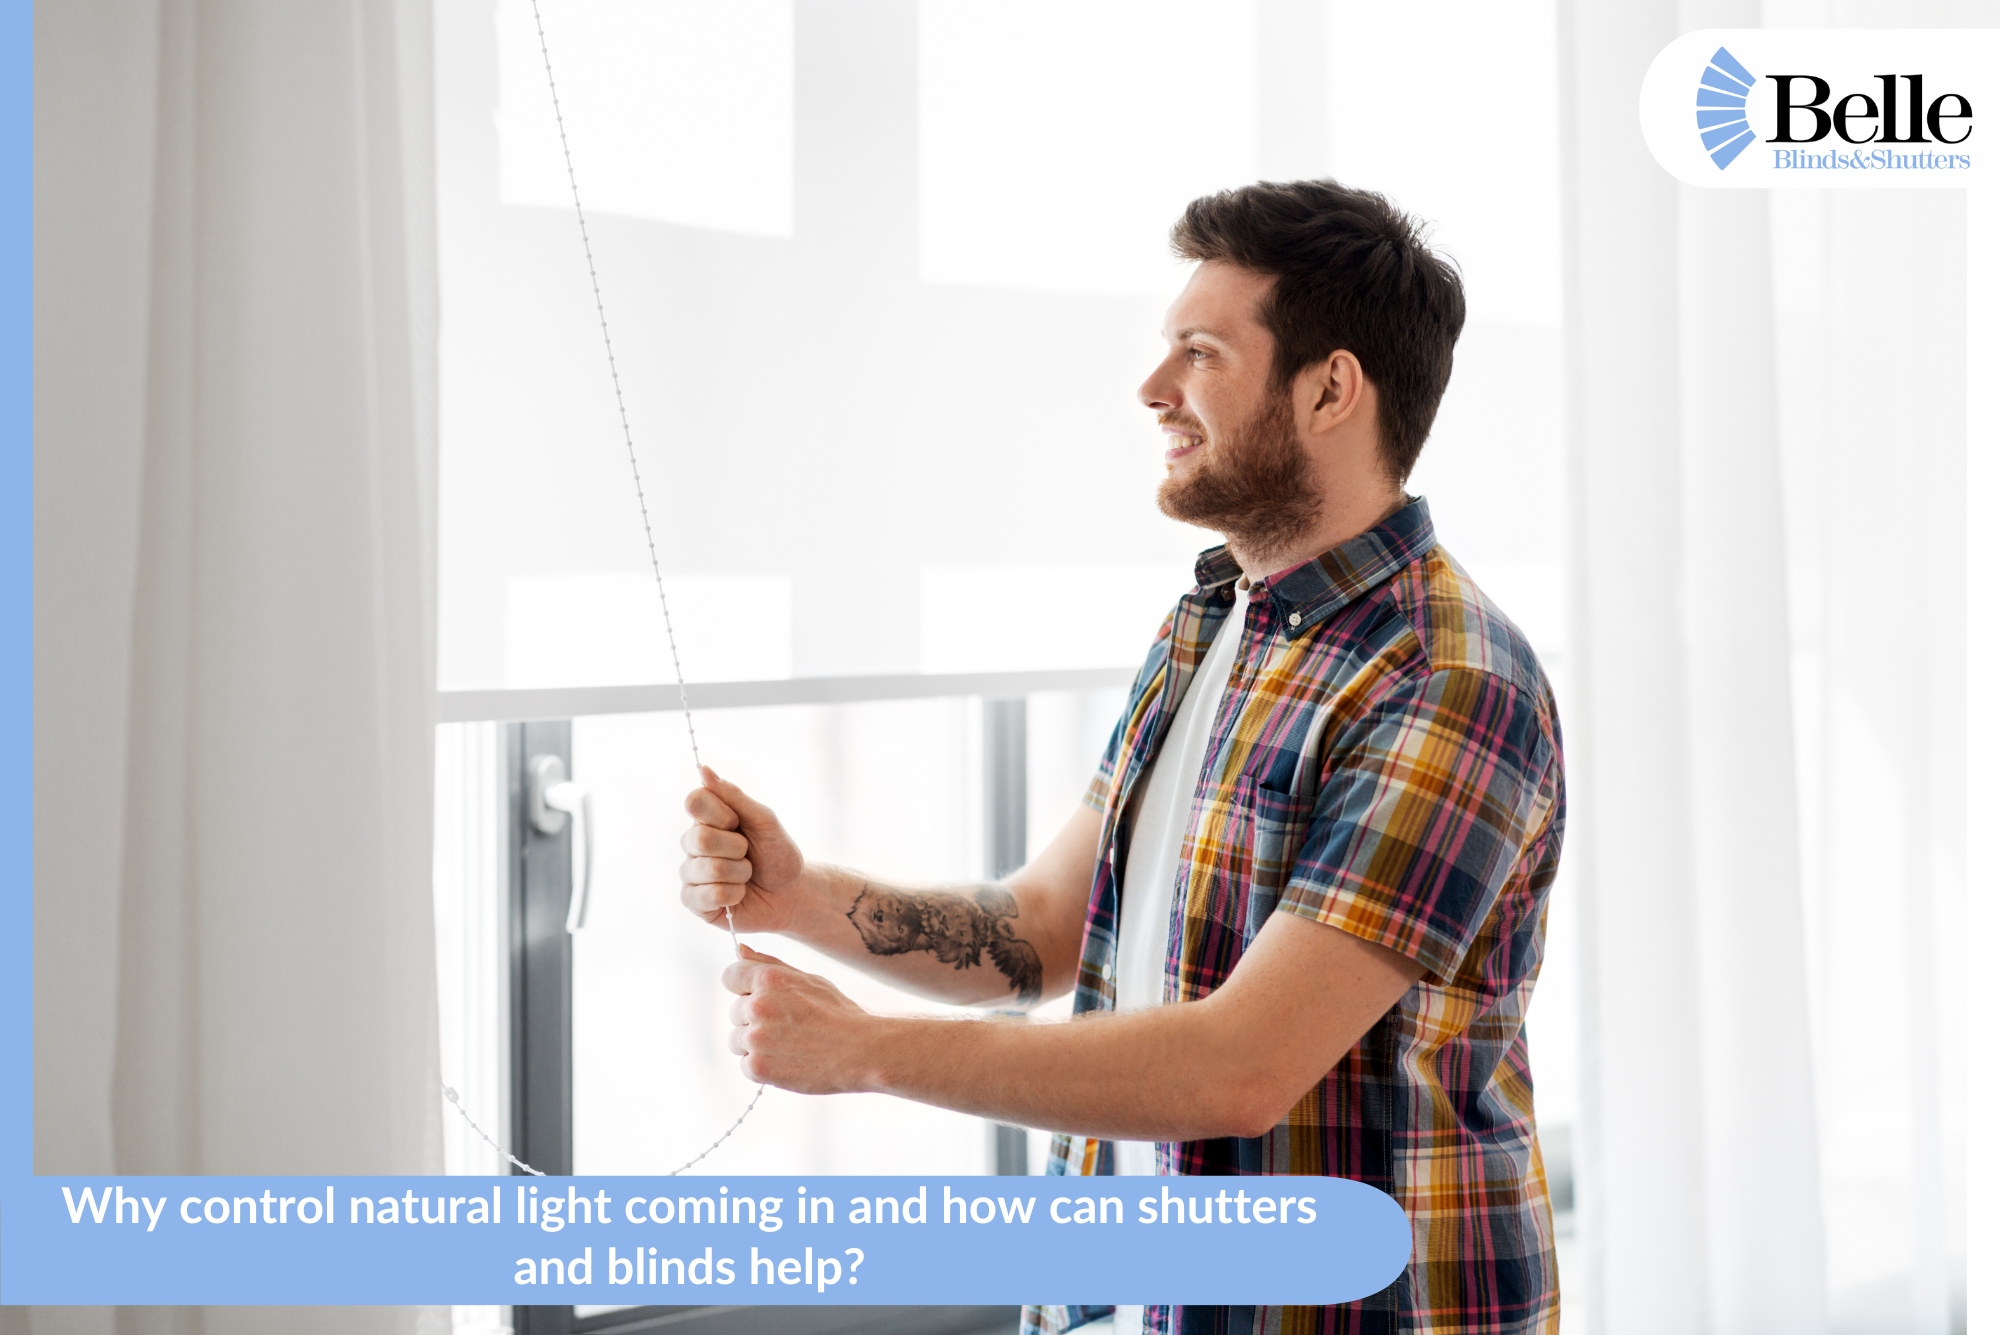 Why Control Natural Light Coming In And How Can Shutters And Blinds Help